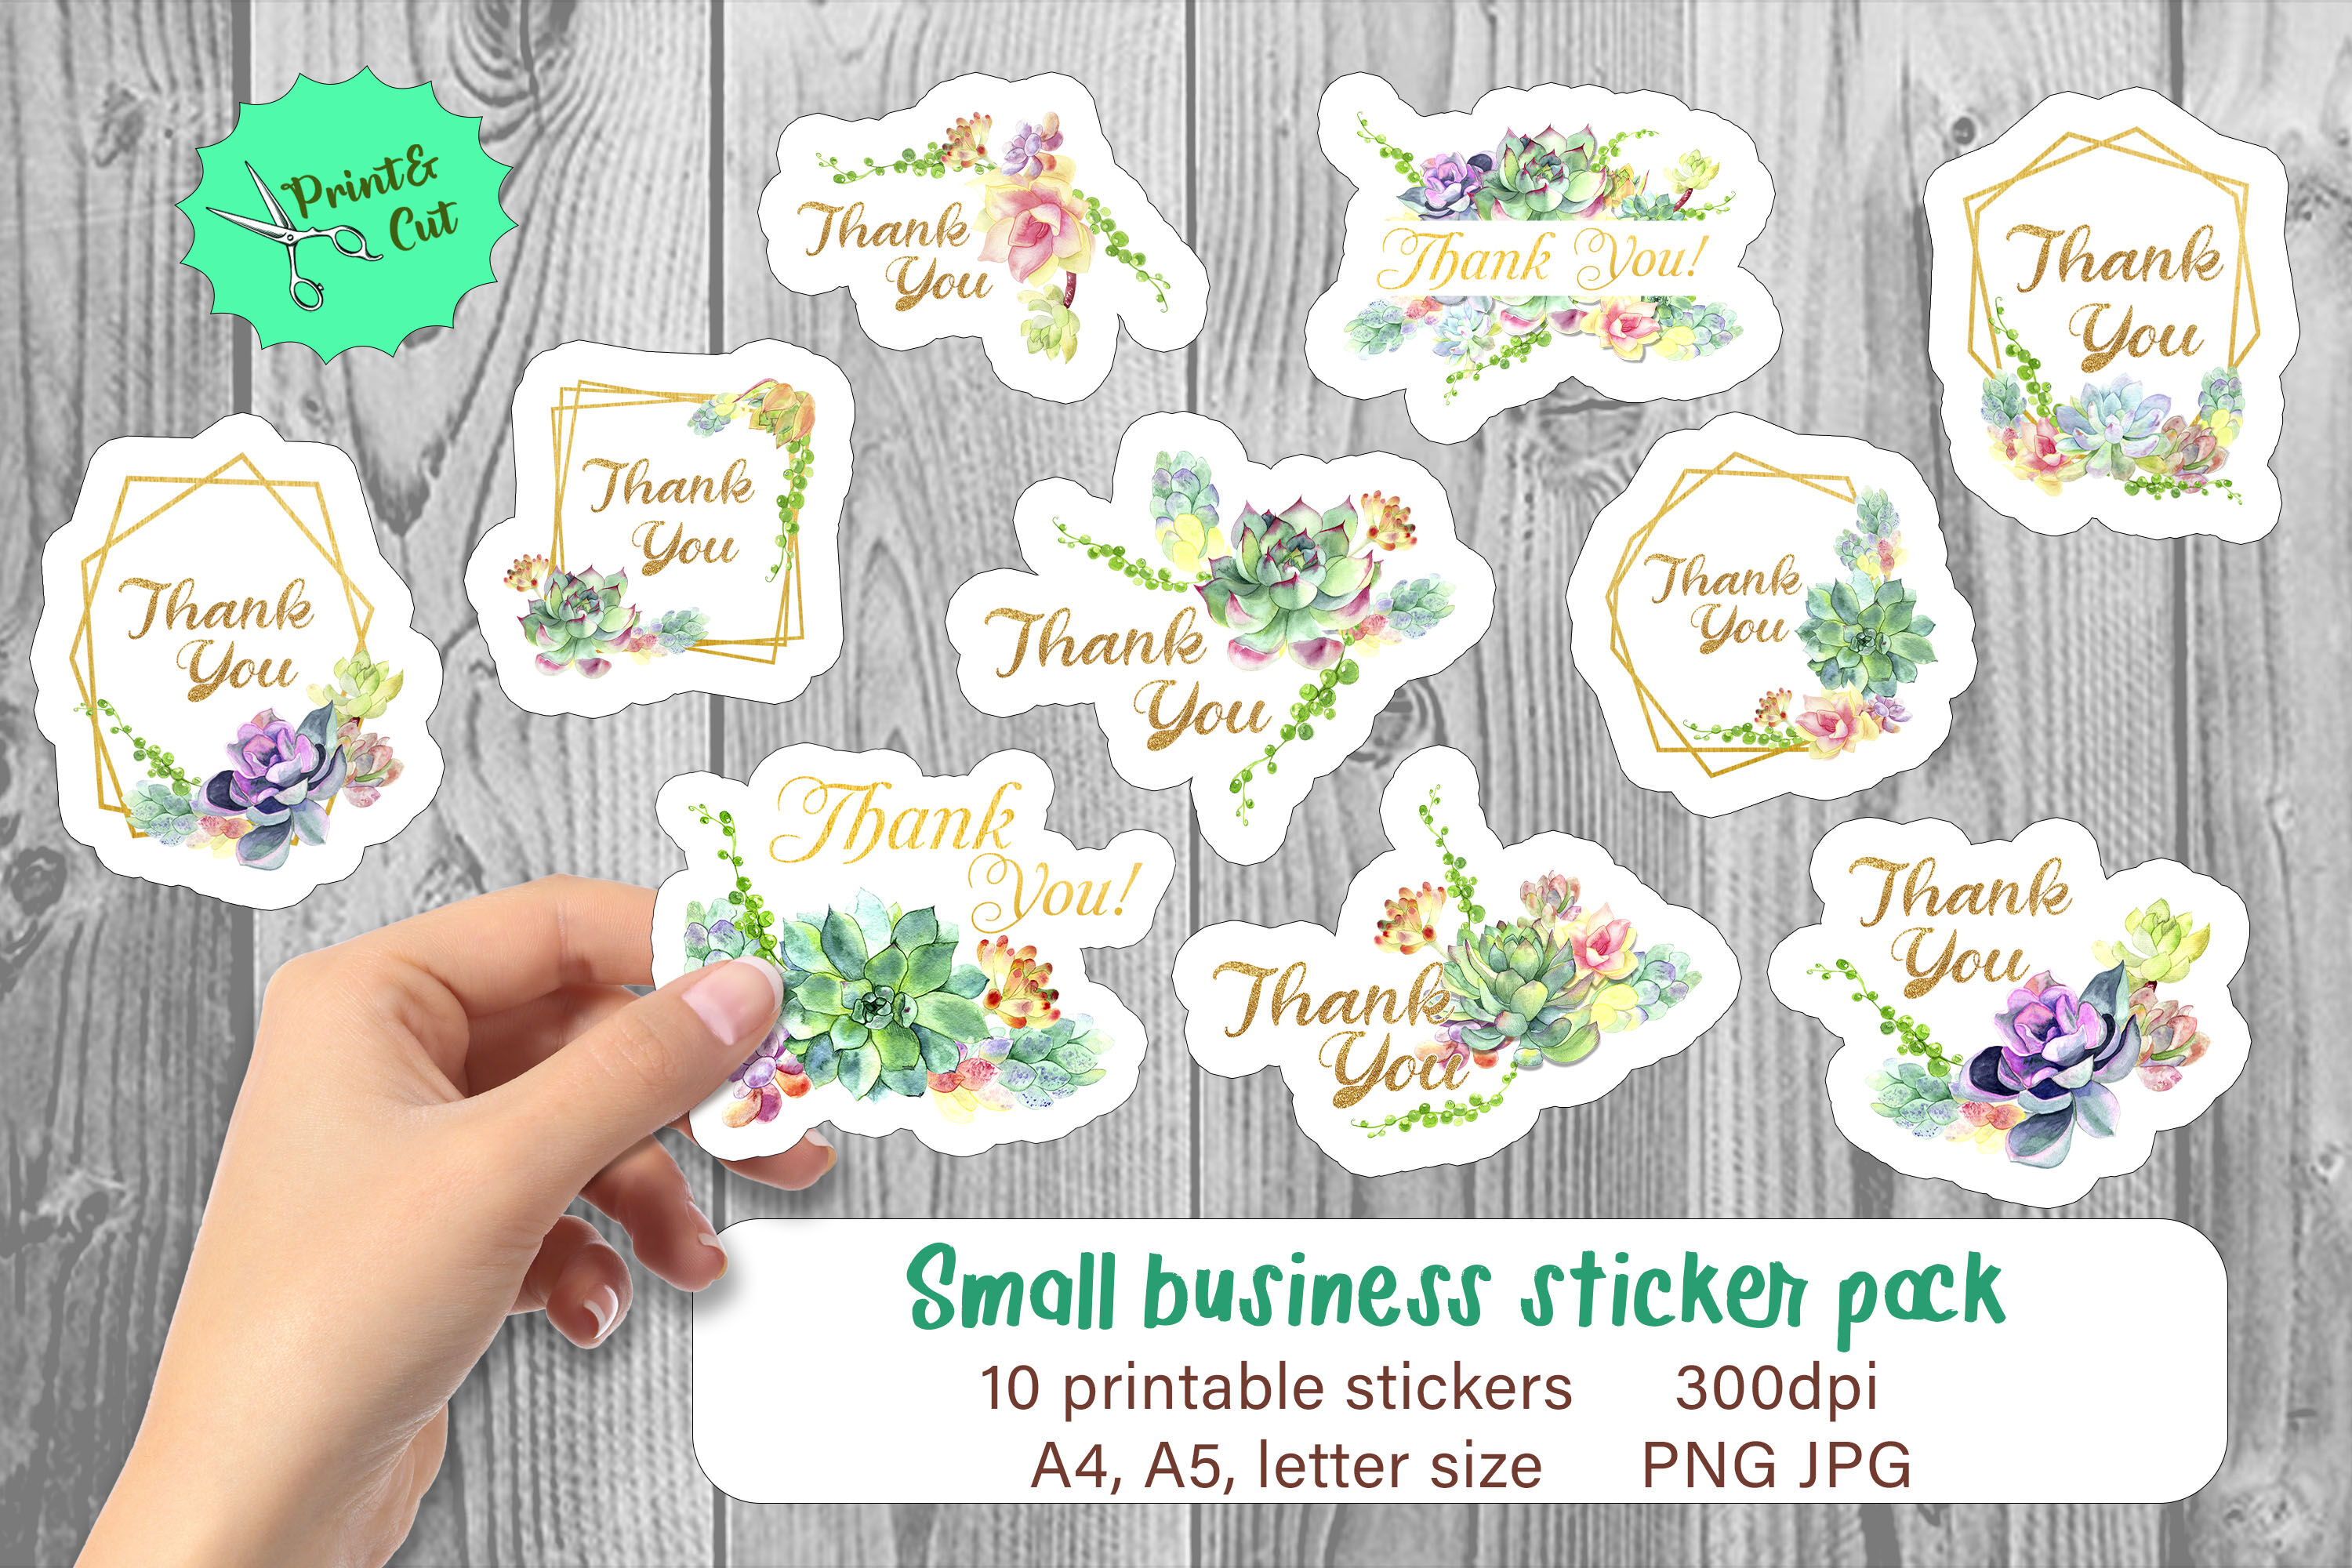 https://media1.thehungryjpeg.com/thumbs2/ori_3952390_wu8tyo3oxotve75m0jamh60cujx2ym01g10acunq_thank-you-stickers-png-floral-small-business-sticker-pack.jpg